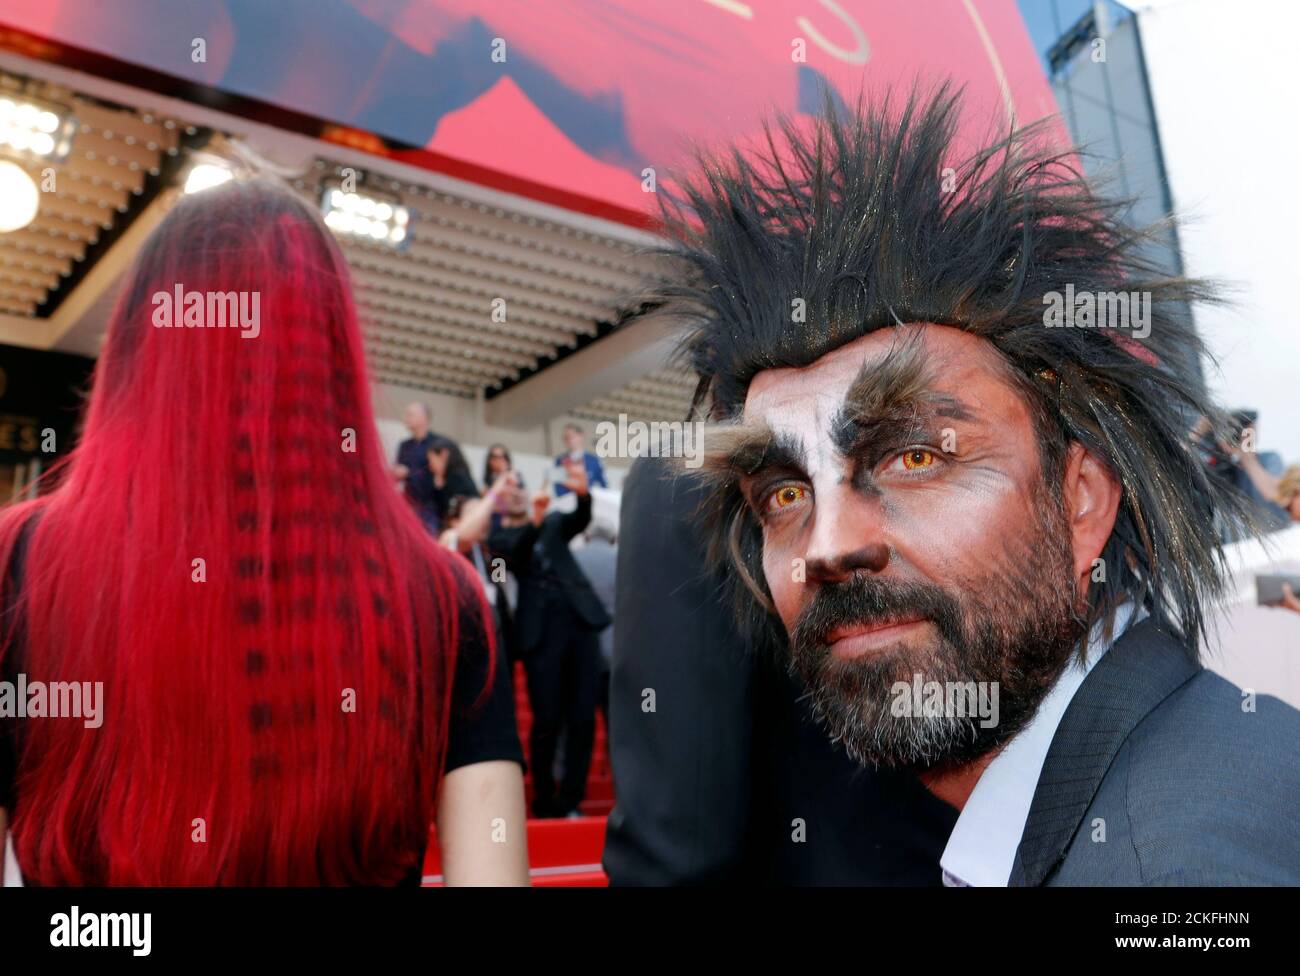 70th Cannes Film Festival - Screening of the film "Rodin" in competition -  Red Carpet Arrivals - Cannes, France. 24/05/2017. Cast member and crew of  the film "Zombillenium" arrive. REUTERS/Eric Gaillard Stock Photo - Alamy